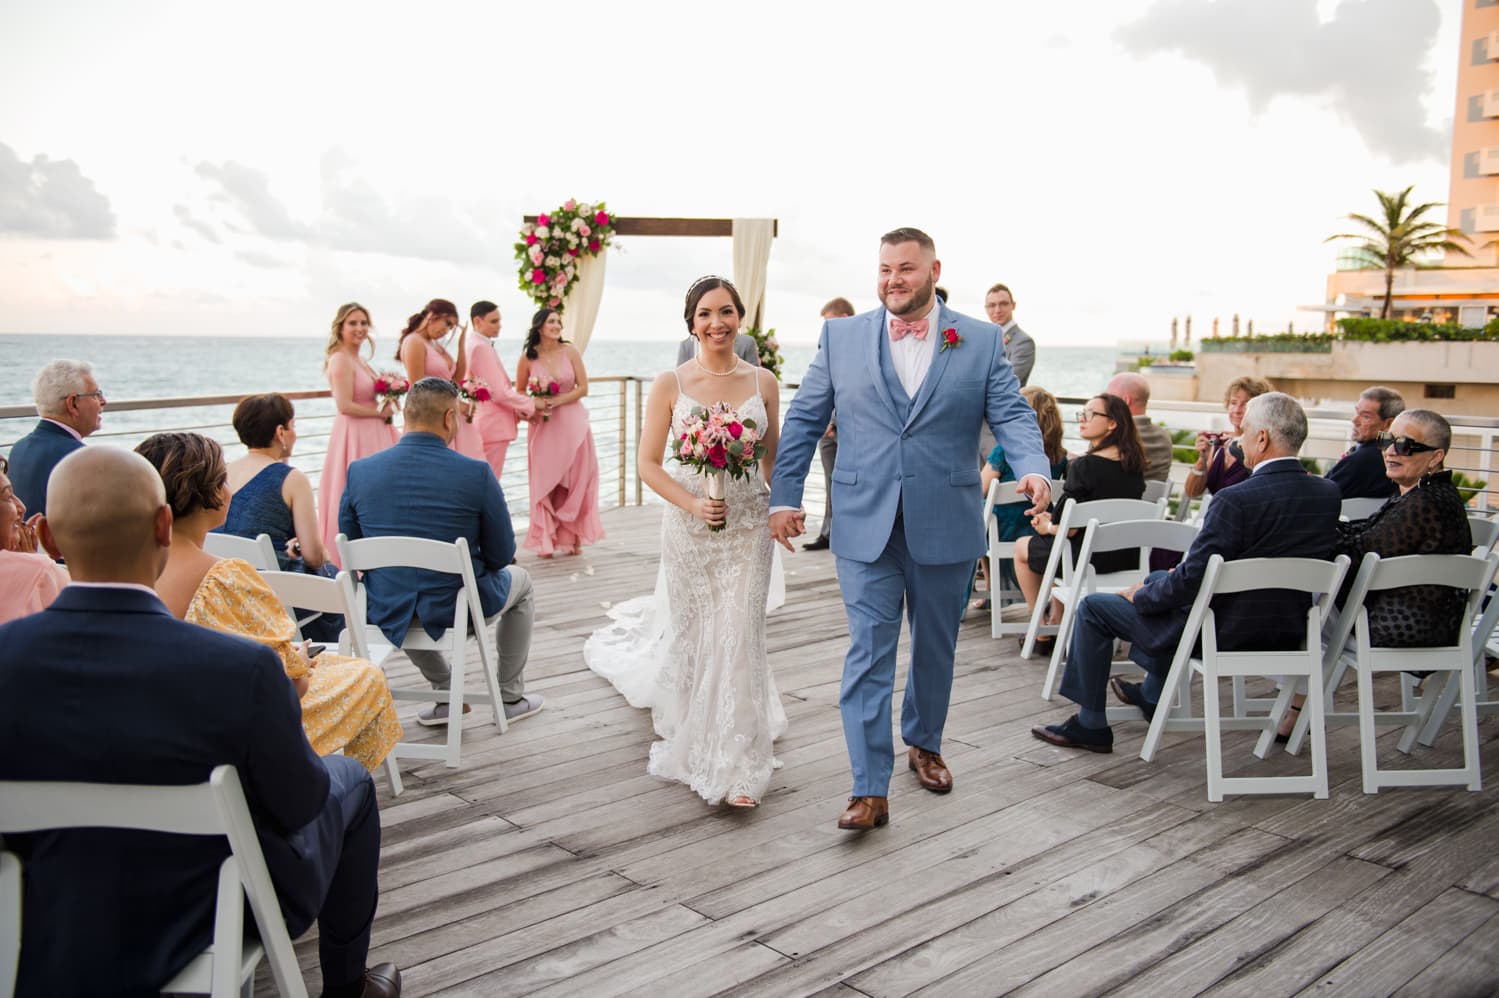 Condado Ocean Club is a beachfront destination wedding venue located in San Juan, PR. Ideal for small weddings to multi-day events with rehearsal dinners.